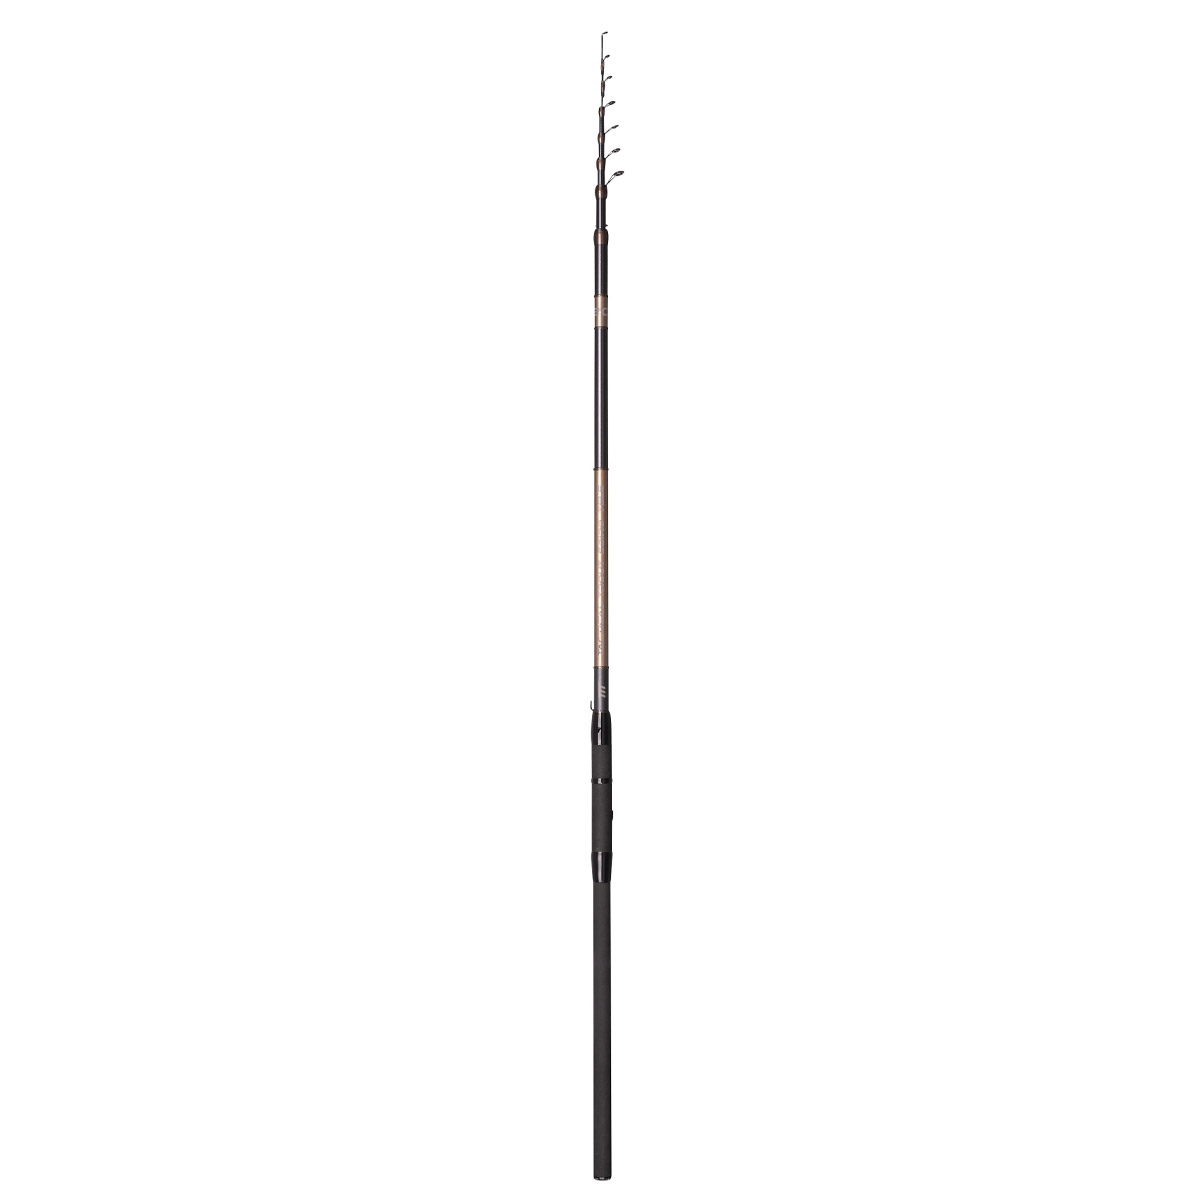 Spro Trout Master Tactical Trout Sbiro Tele 3,00M 